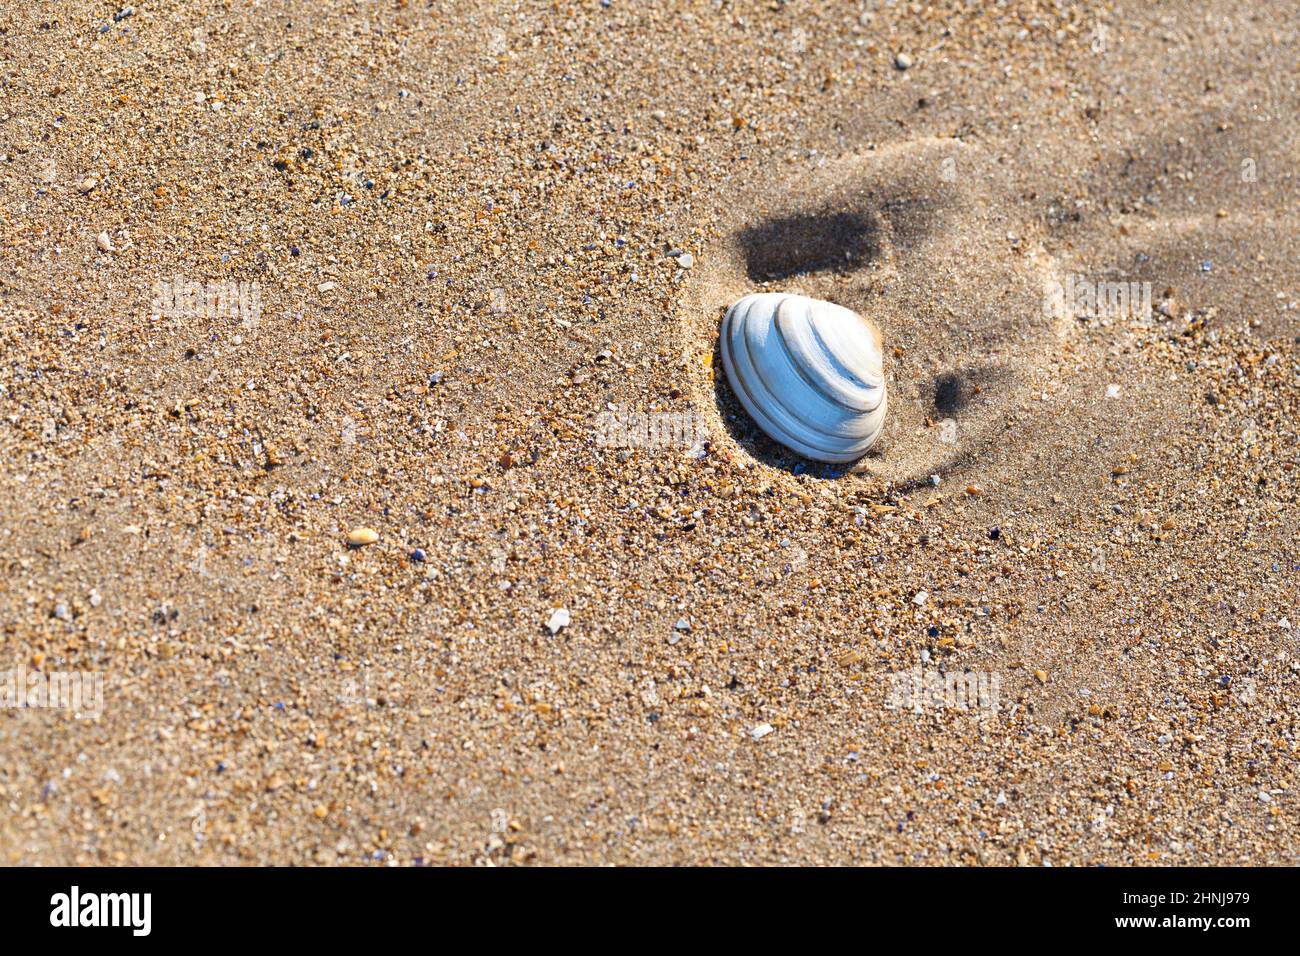 Mussle in the beach sand on a sunny day Stock Photo